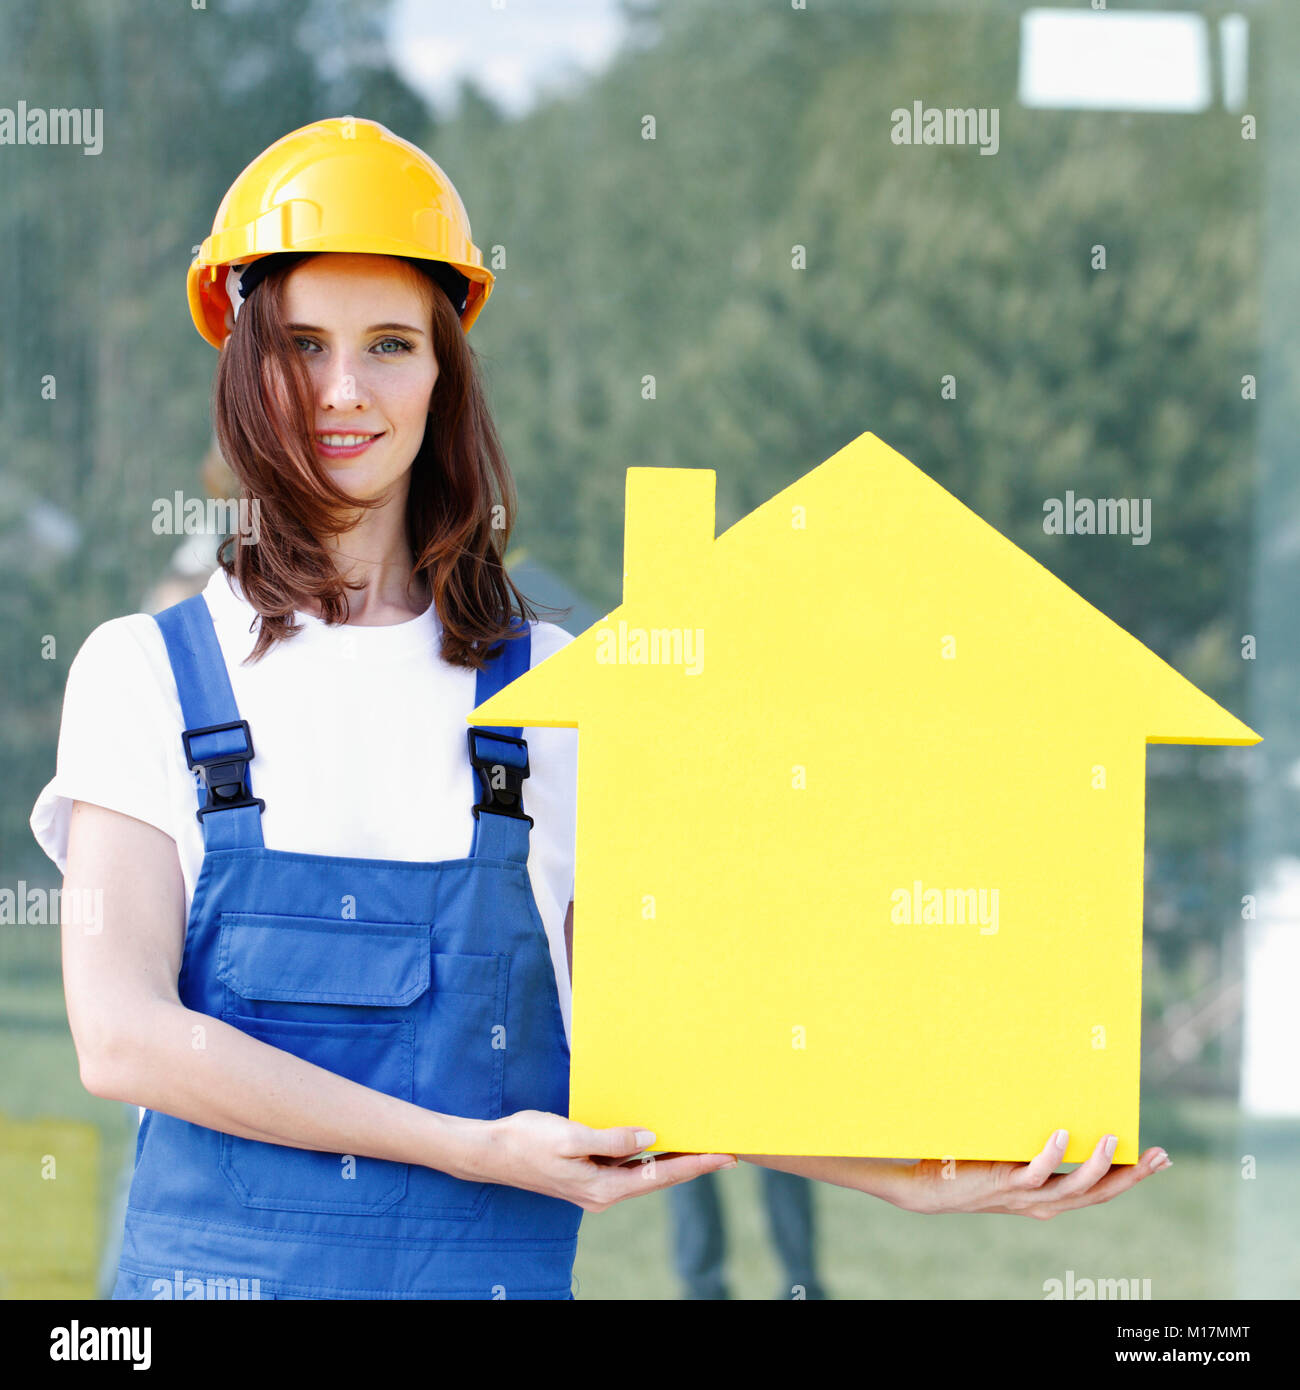 Forewoman presenting house symbol, construction concept Stock Photo